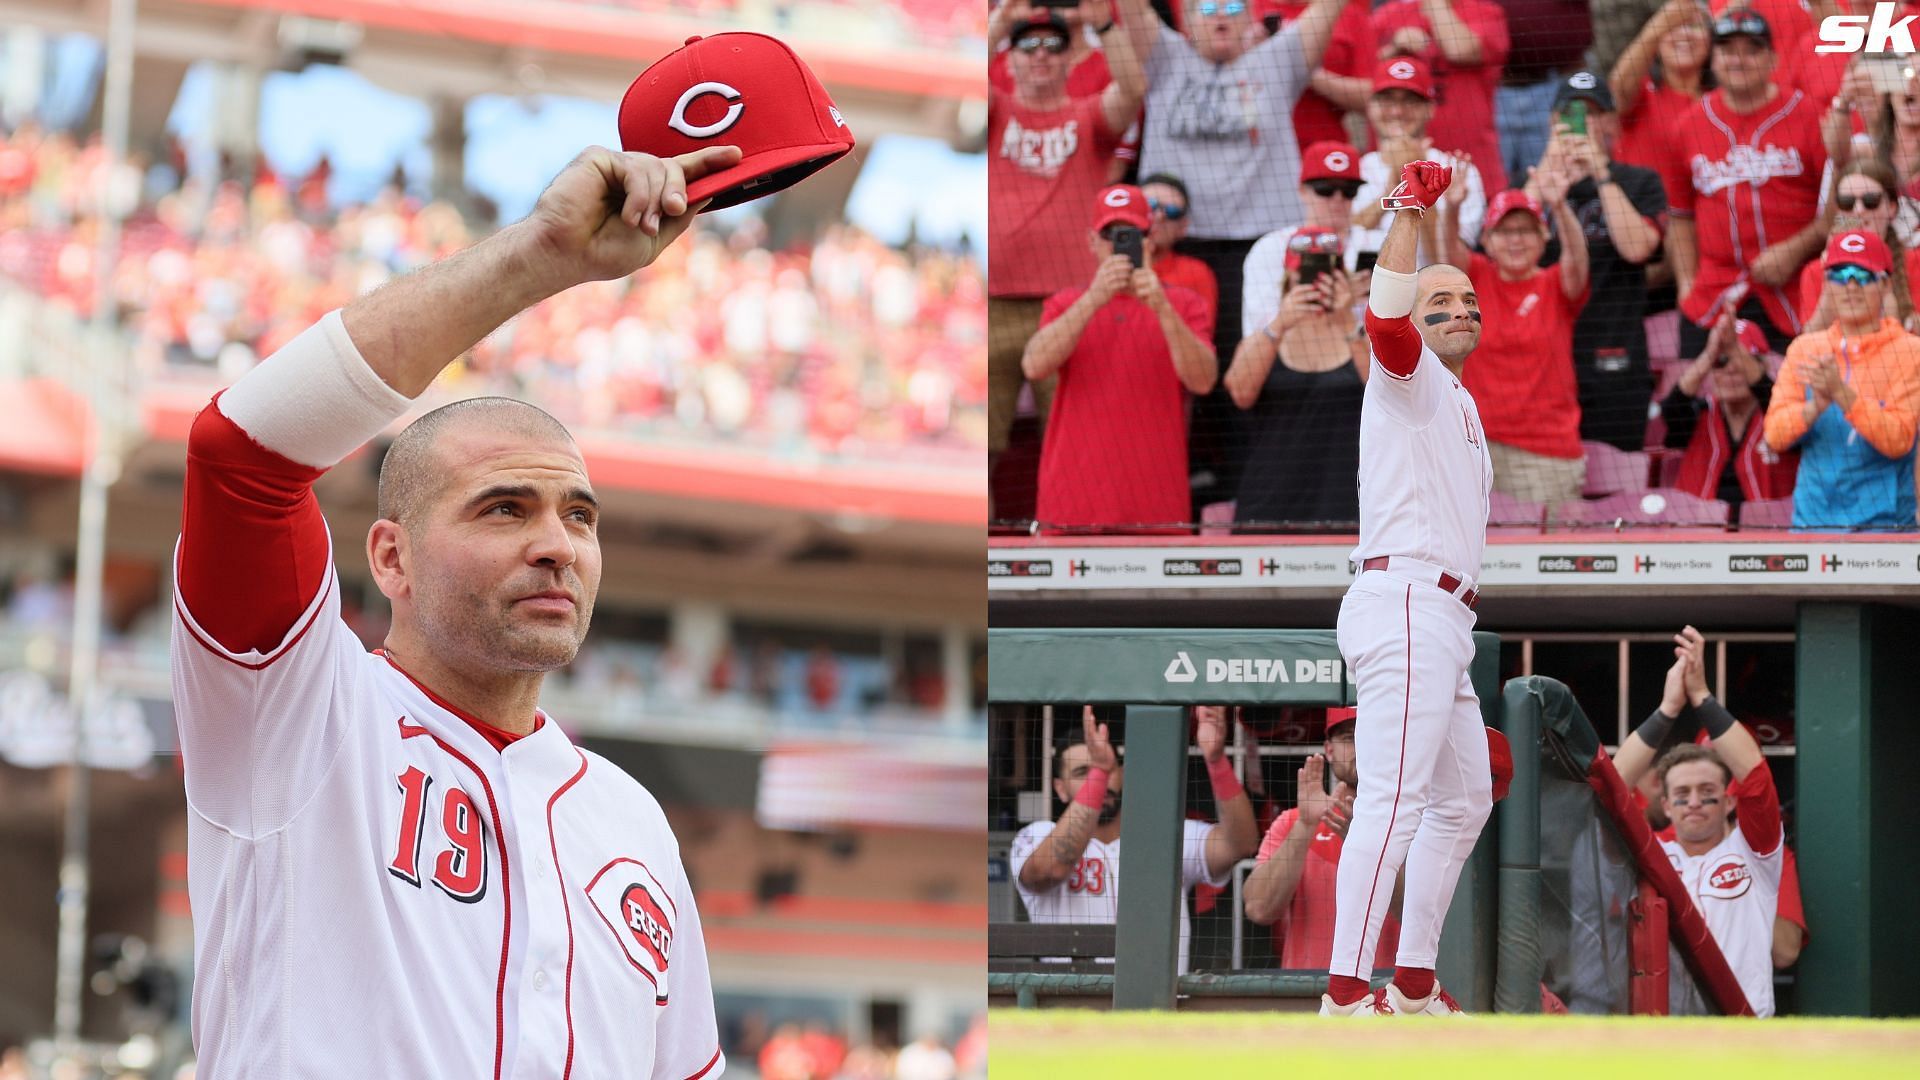 Joey Votto of the Cincinnati Reds acknowledges the crowd after the 4-2 win against the Pittsburgh Pirates at Great American Ball Park